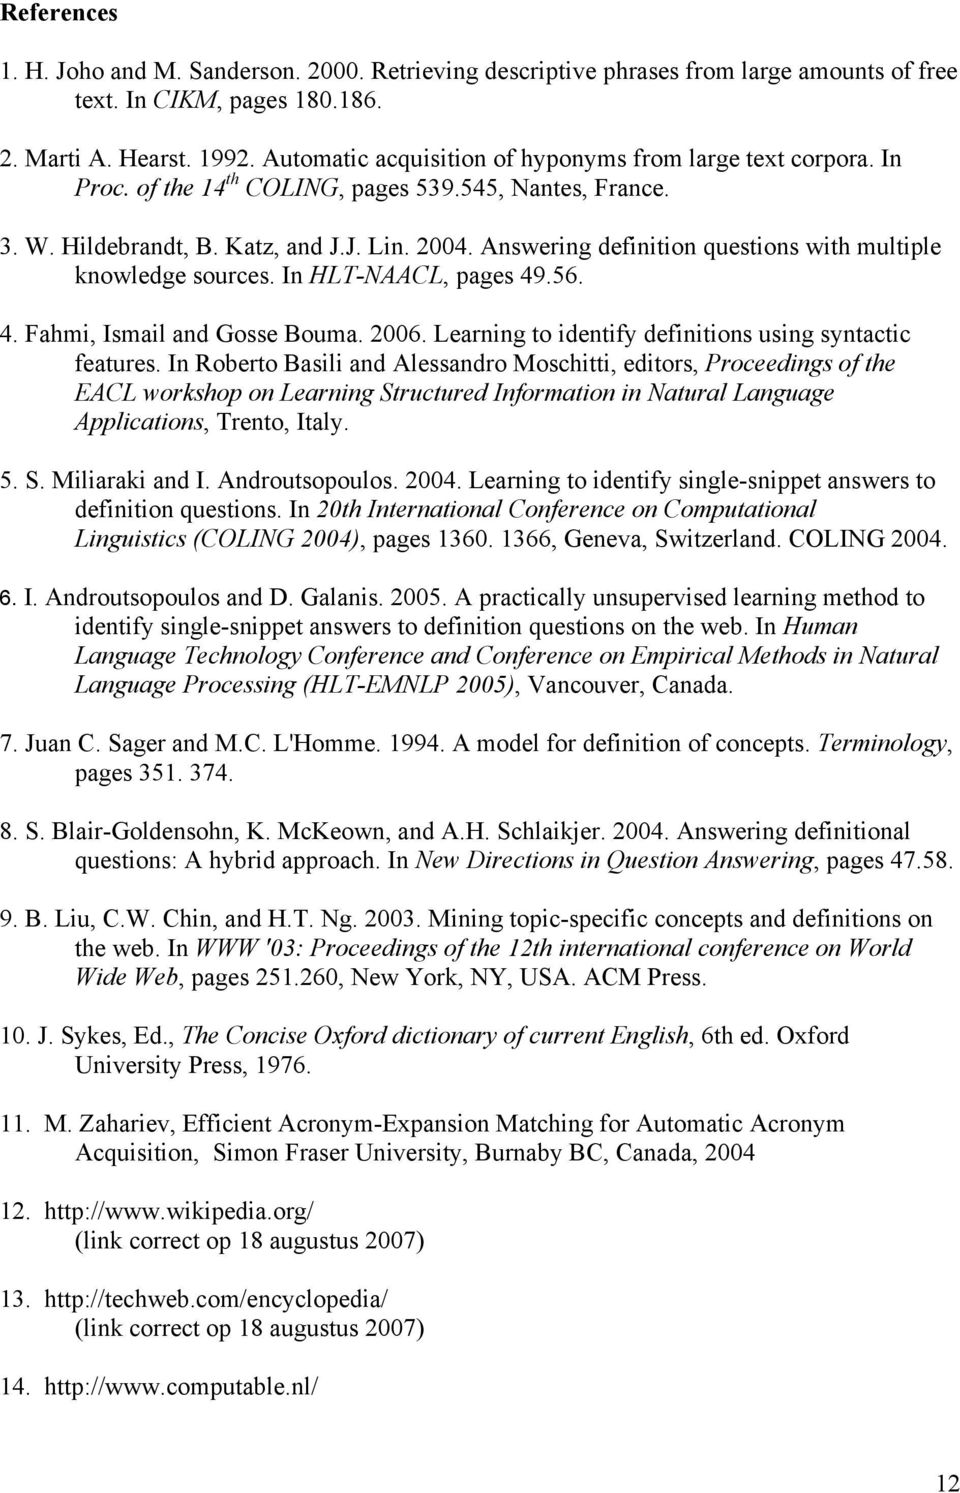 Answering definition questions with multiple knowledge sources. In HLT-NAACL, pages 49.56. 4. Fahmi, Ismail and Gosse Bouma. 2006. Learning to identify definitions using syntactic features.